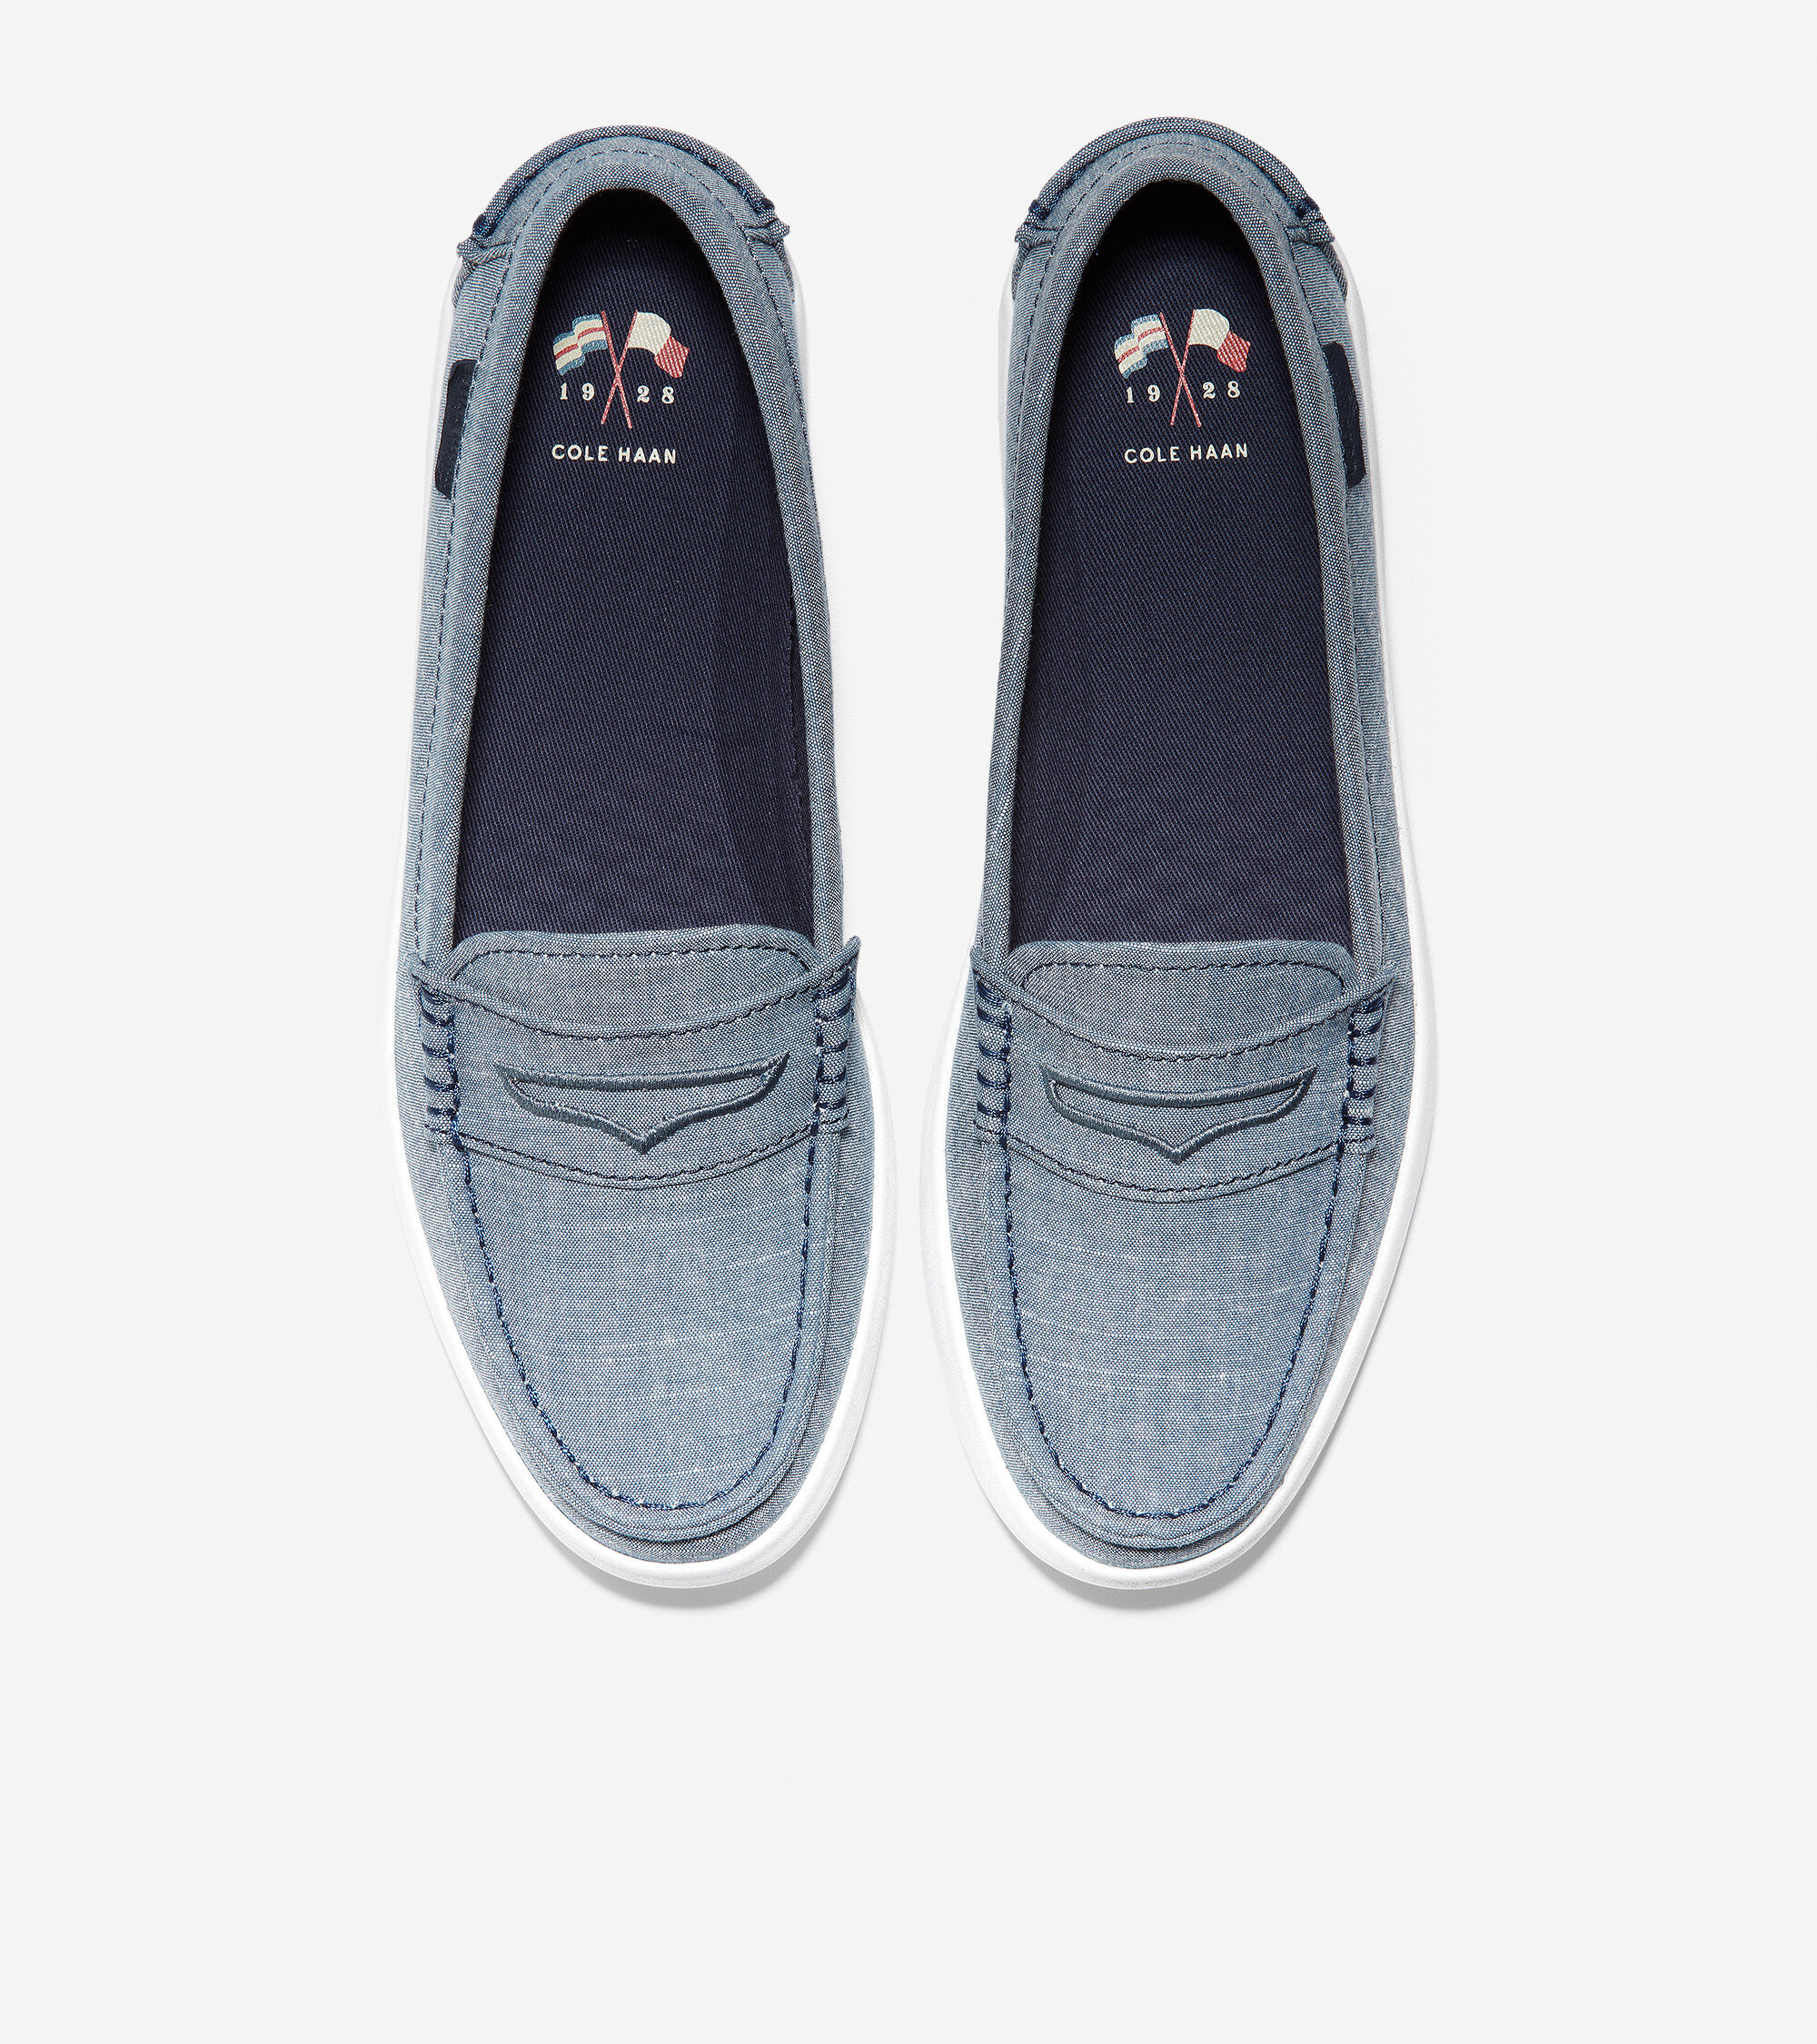 Nantucket Loafer in Blue Chambray 